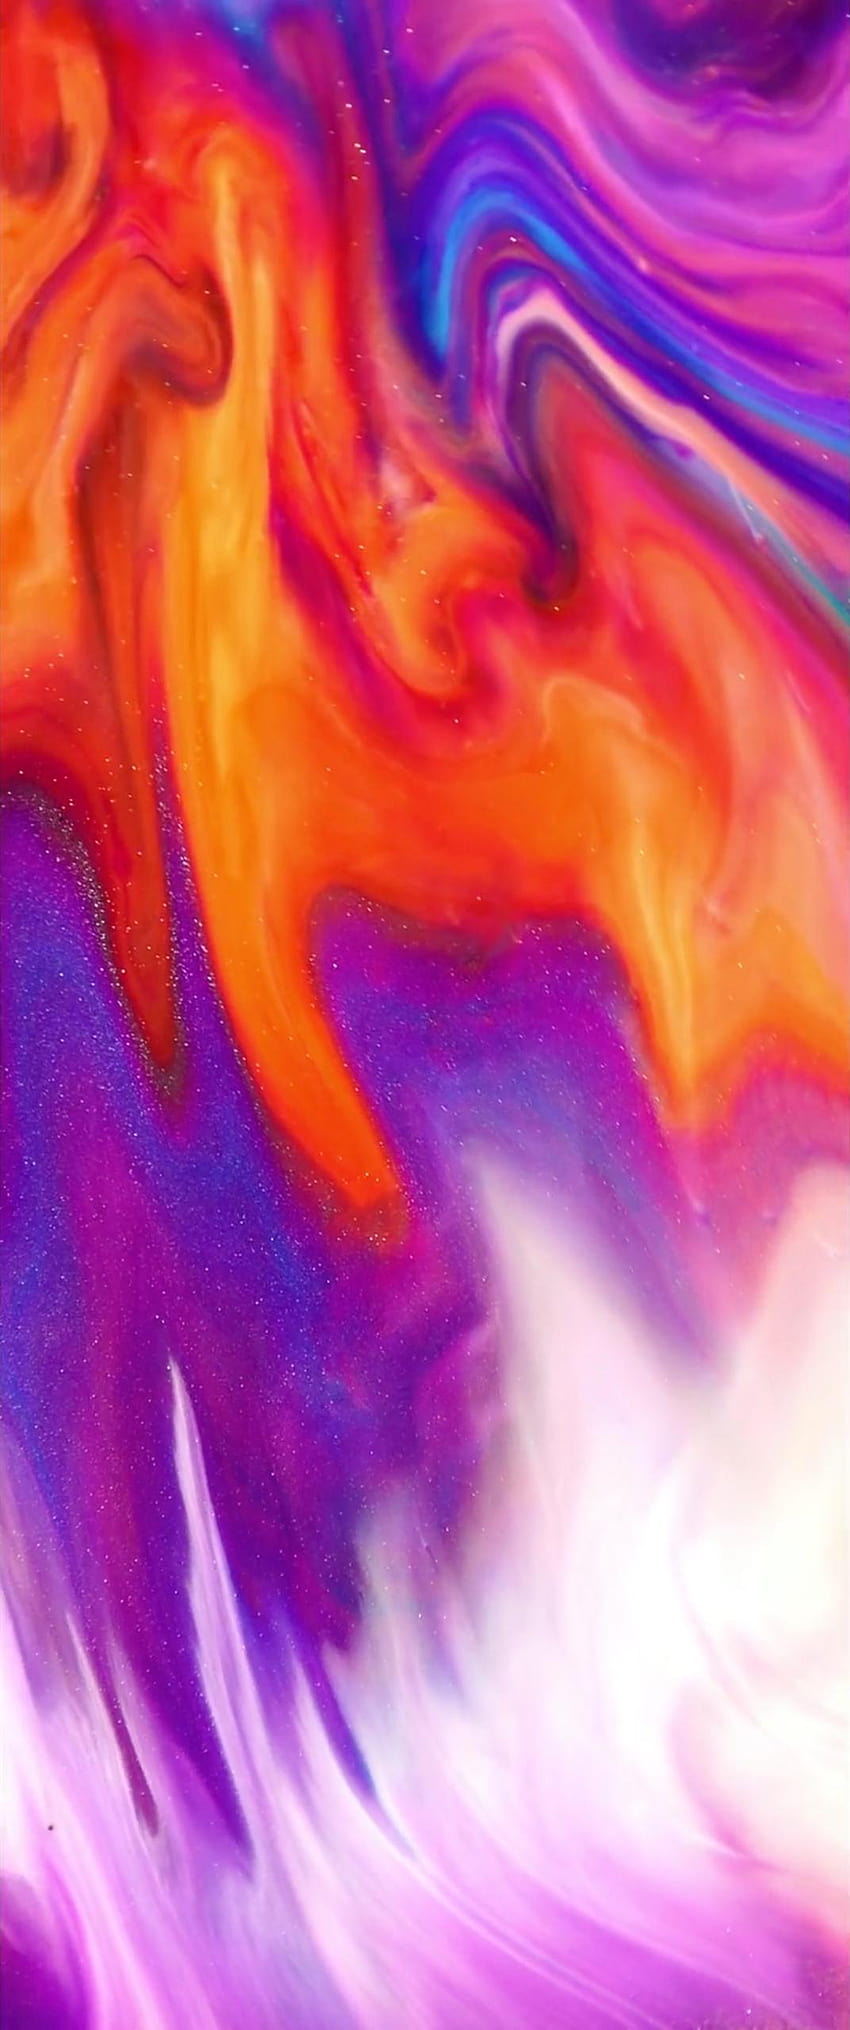 iPhone X marketing video, flowing colored sand HD phone wallpaper